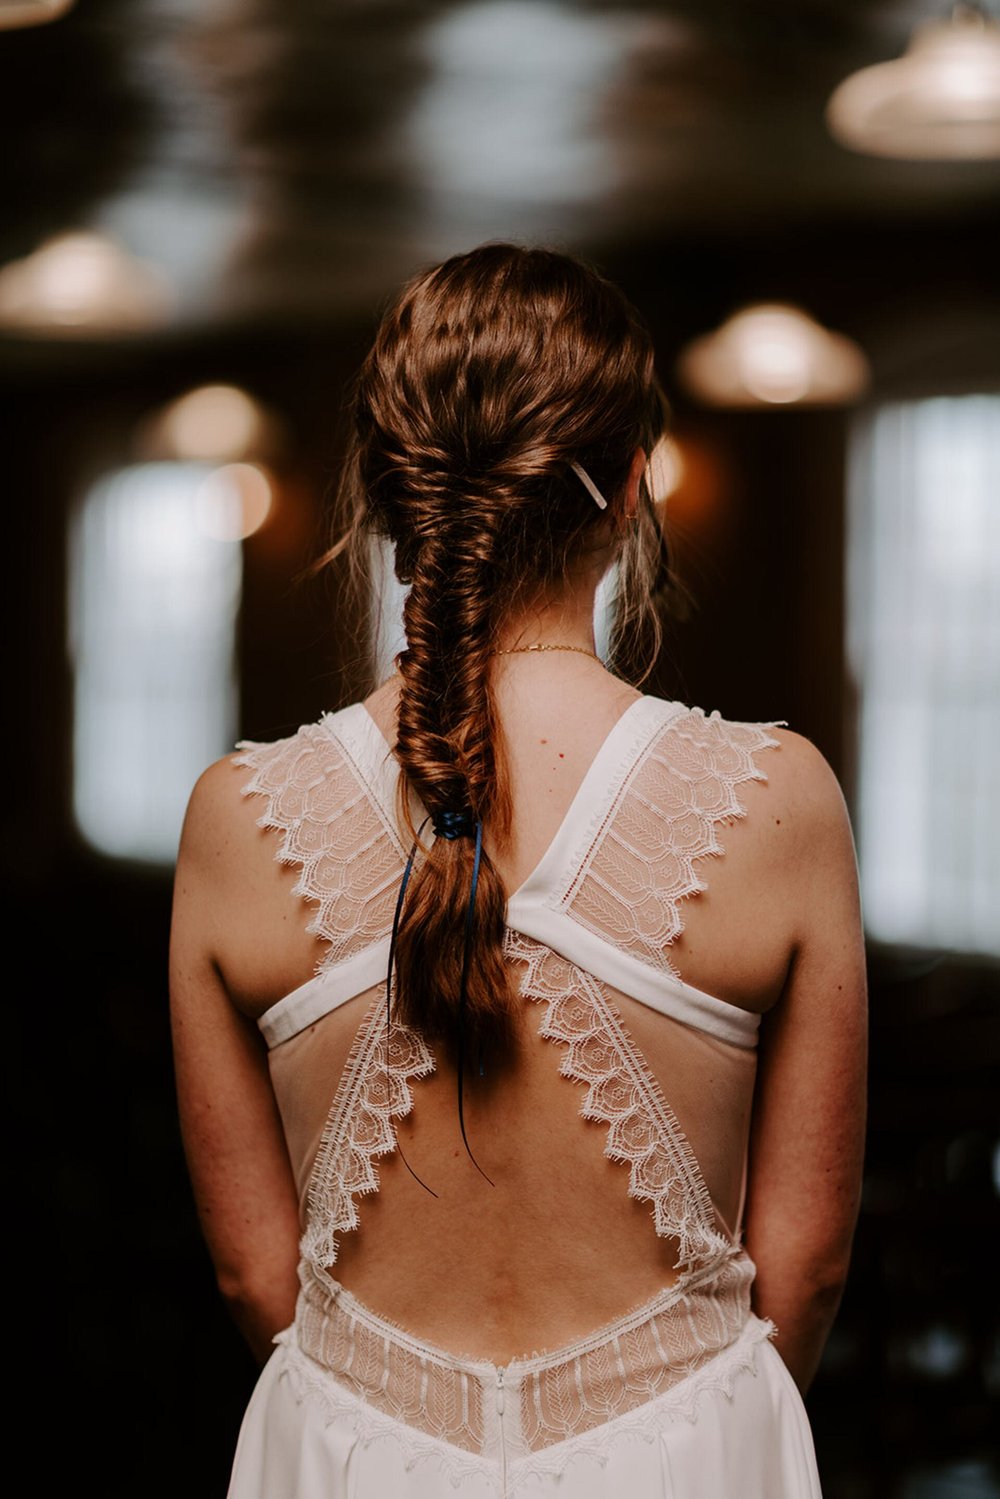  The back of Emma’s dress is made of four lace panels (the lace has a pointy, scalloped edge) that meet in the centre at the top of her back. Her long brunette hair is in a fishtail plait. 